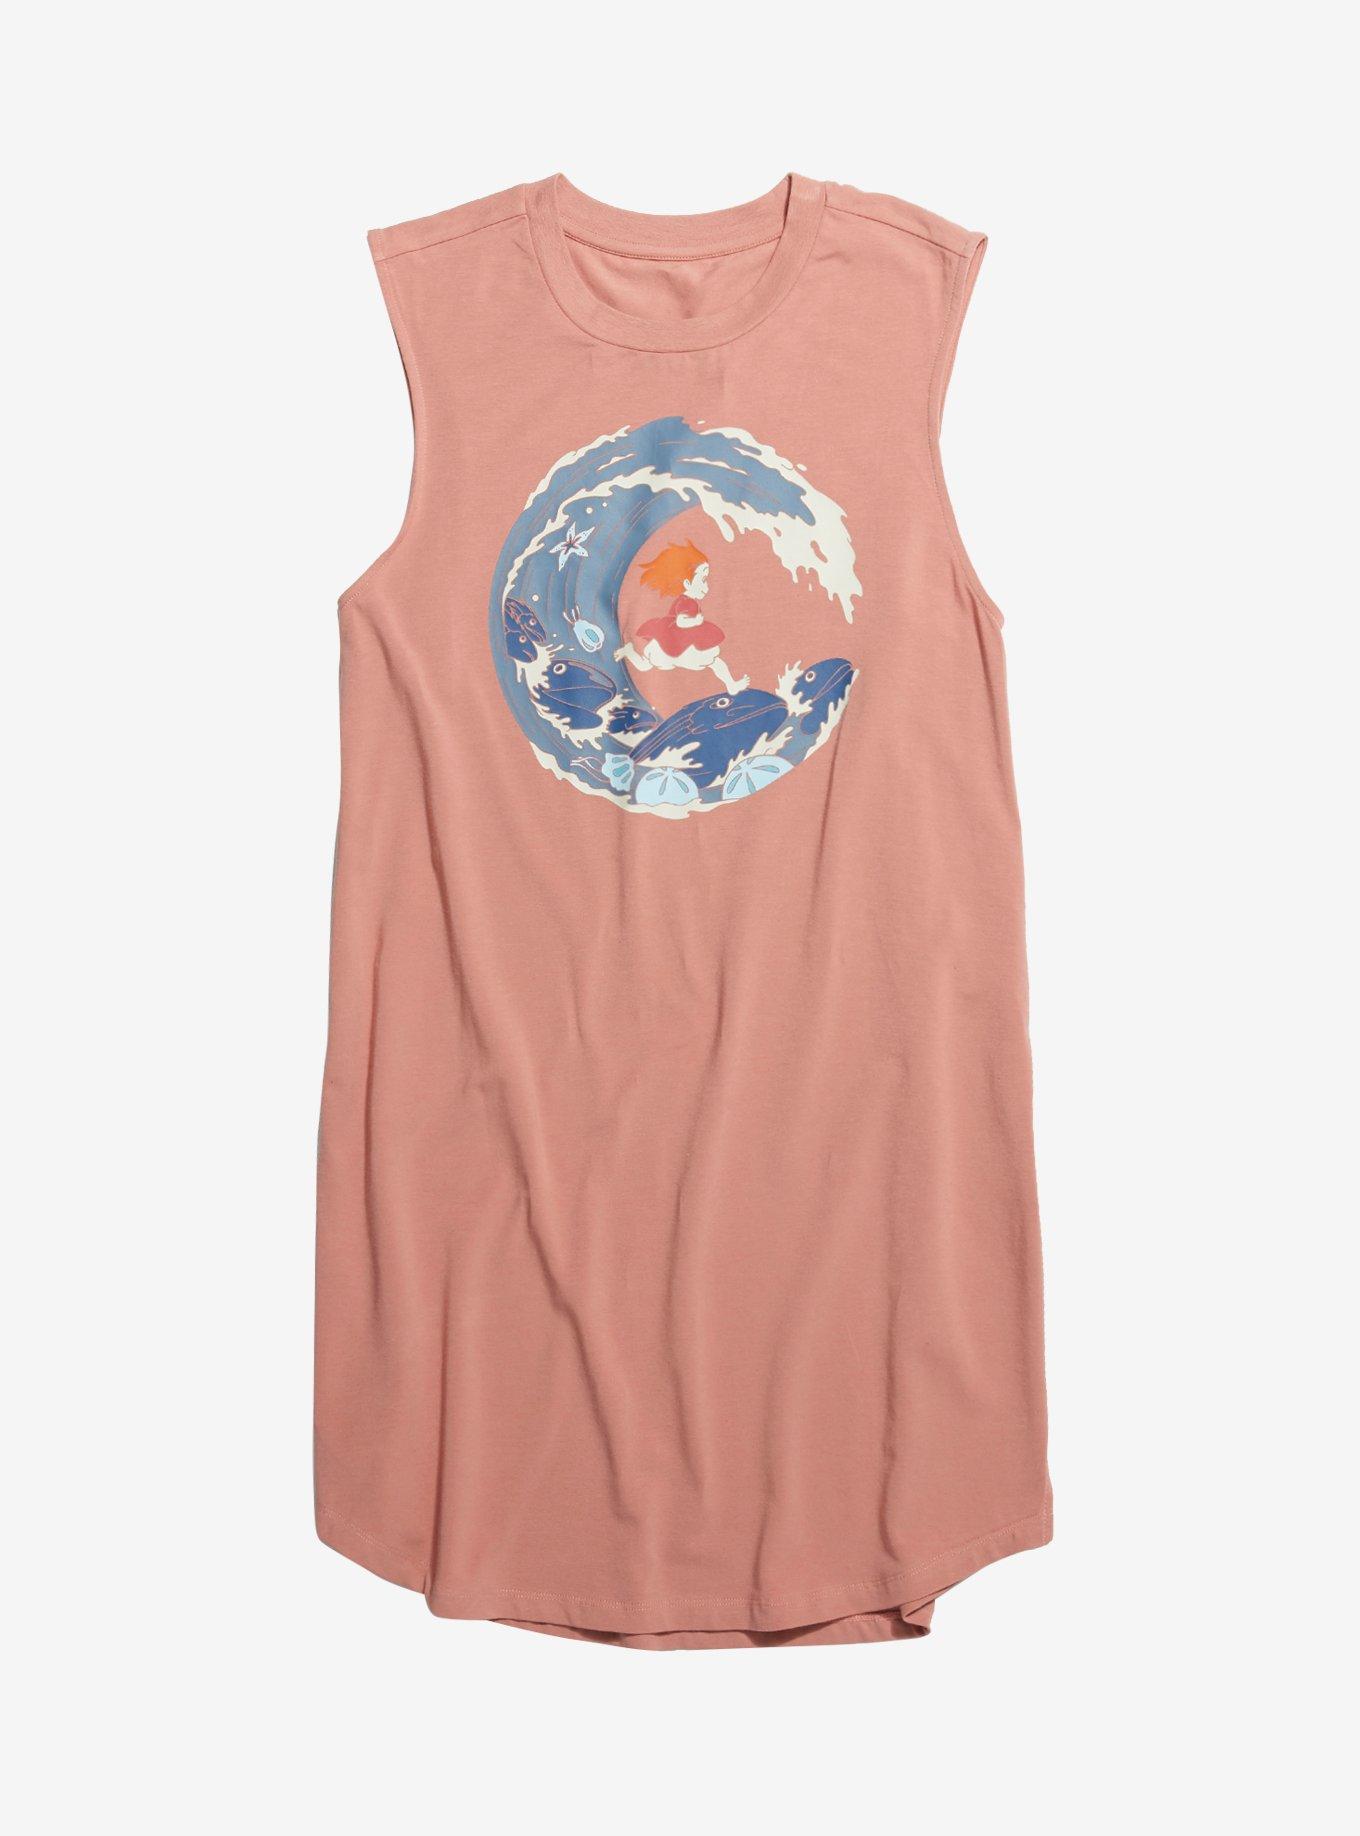 Her Universe Studio Ghibli Earth Day Collection Ponyo Wave Walker Girls Tank Dress, CORAL, hi-res